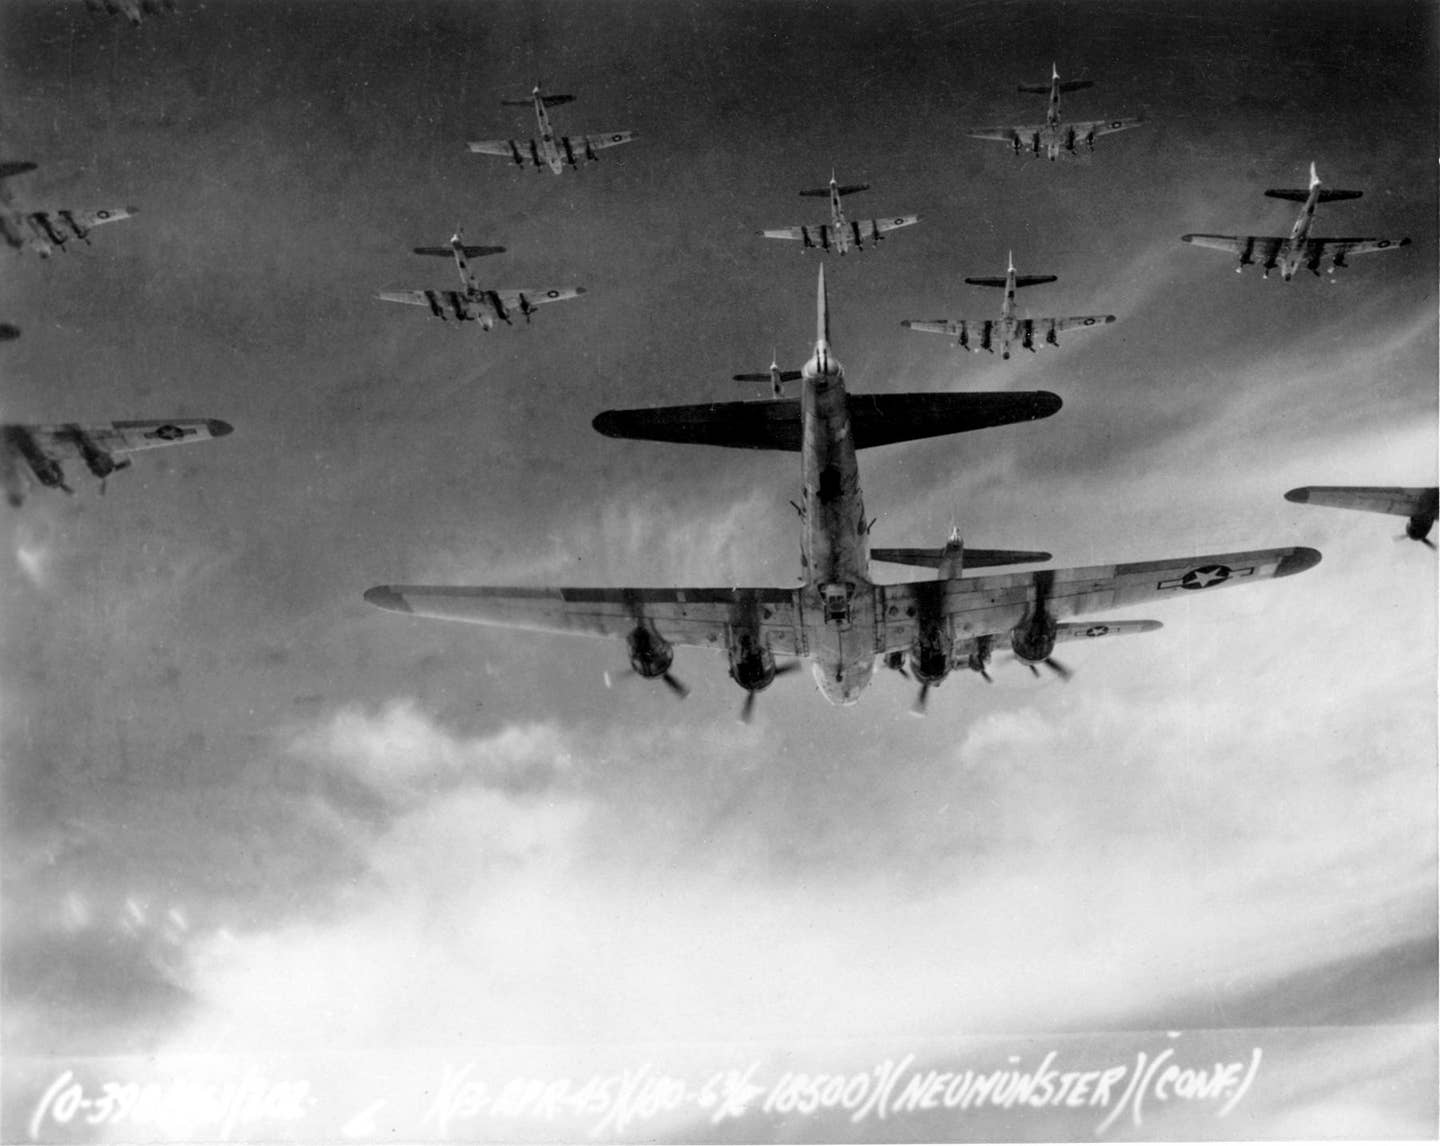 B-17s from the 398th Bombardment Group fly a bombing run to Neumunster, Germany, on April 13, 1945, less than one month before the German surrender on May 8. <em>U.S. Air Force photo</em>